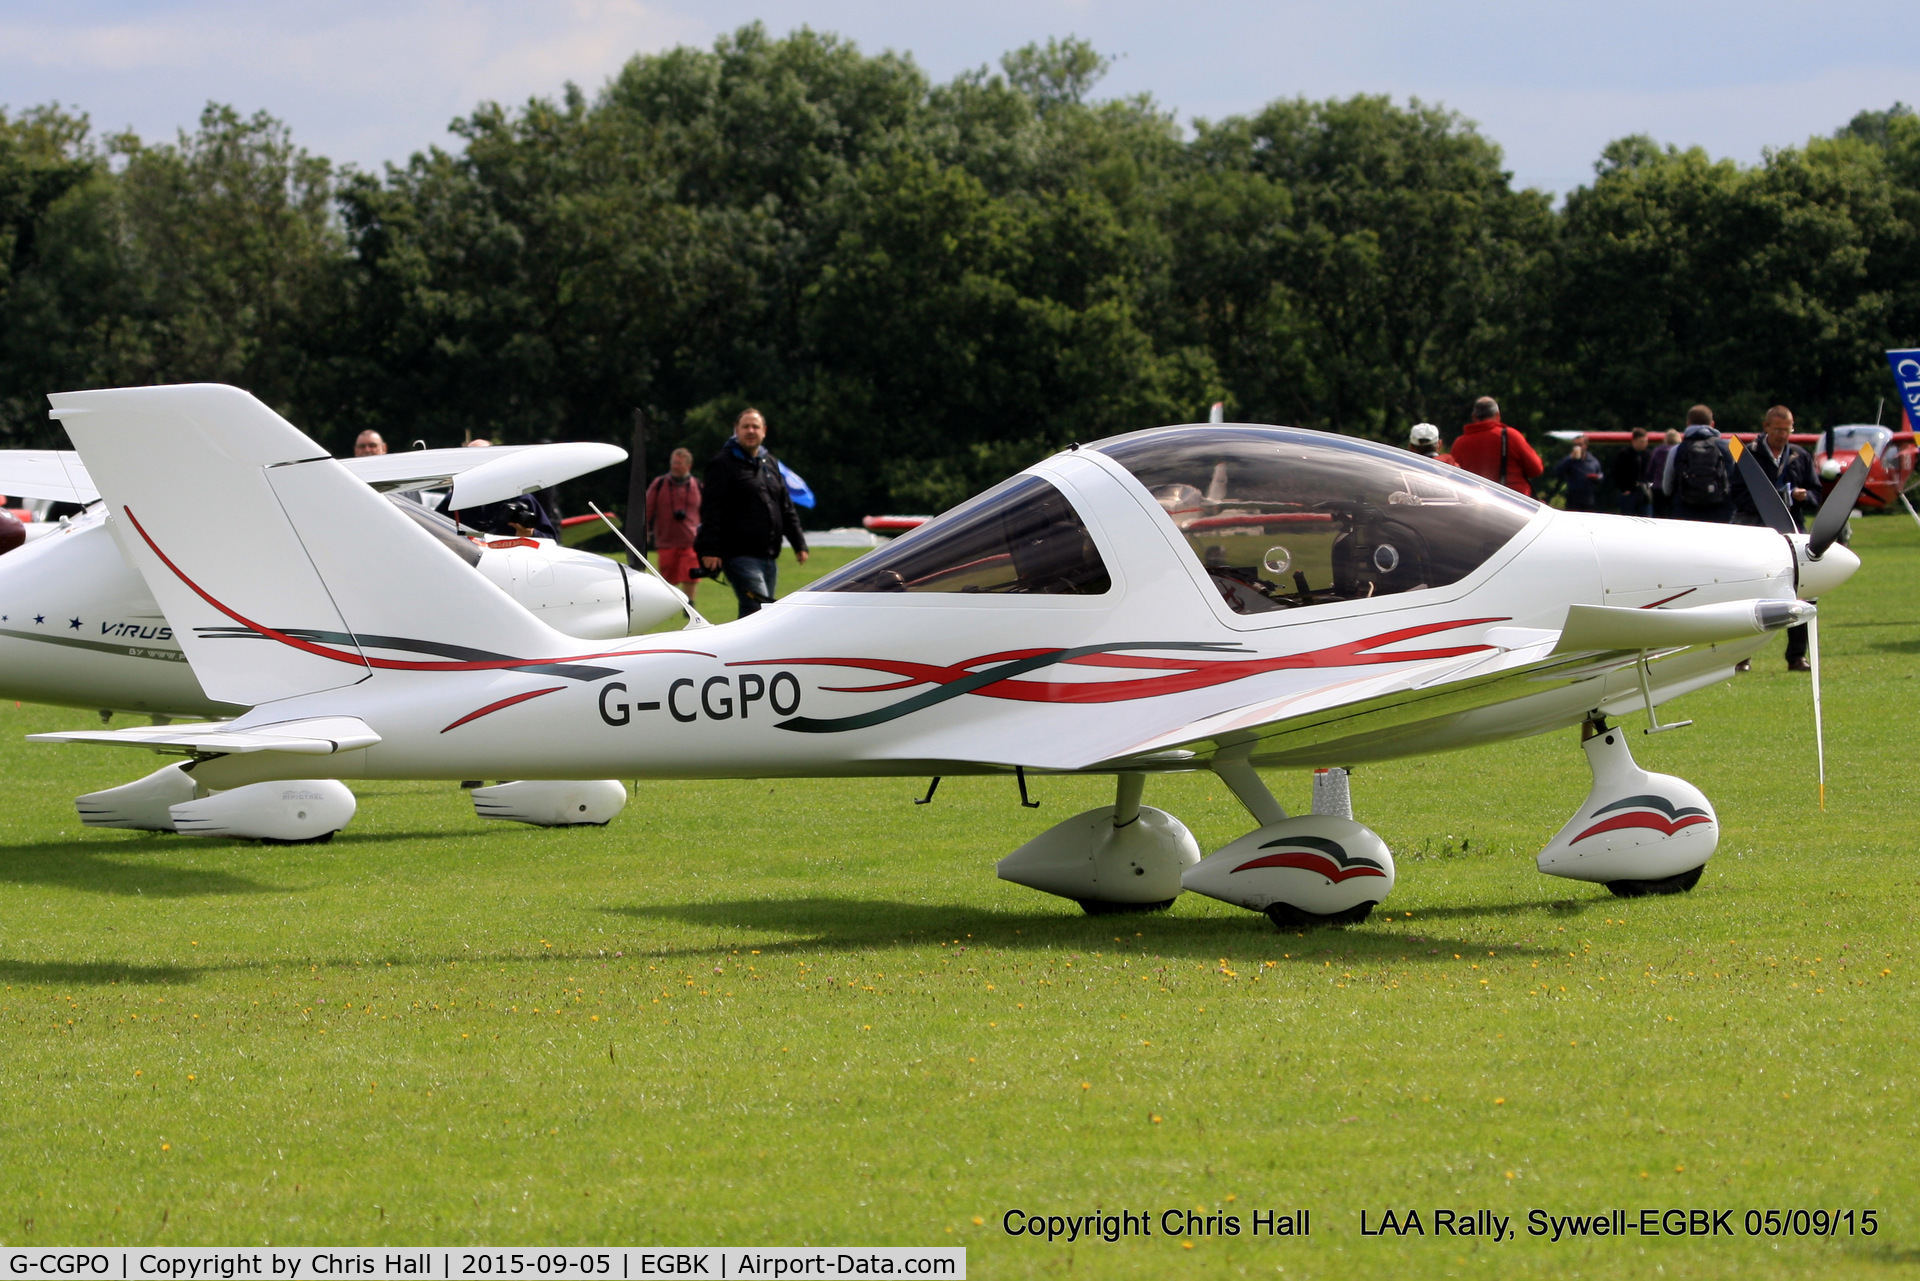 G-CGPO, 2011 TL Ultralight TL-2000UK Sting Carbon C/N LAA 347-14896, at the LAA Rally 2015, Sywell